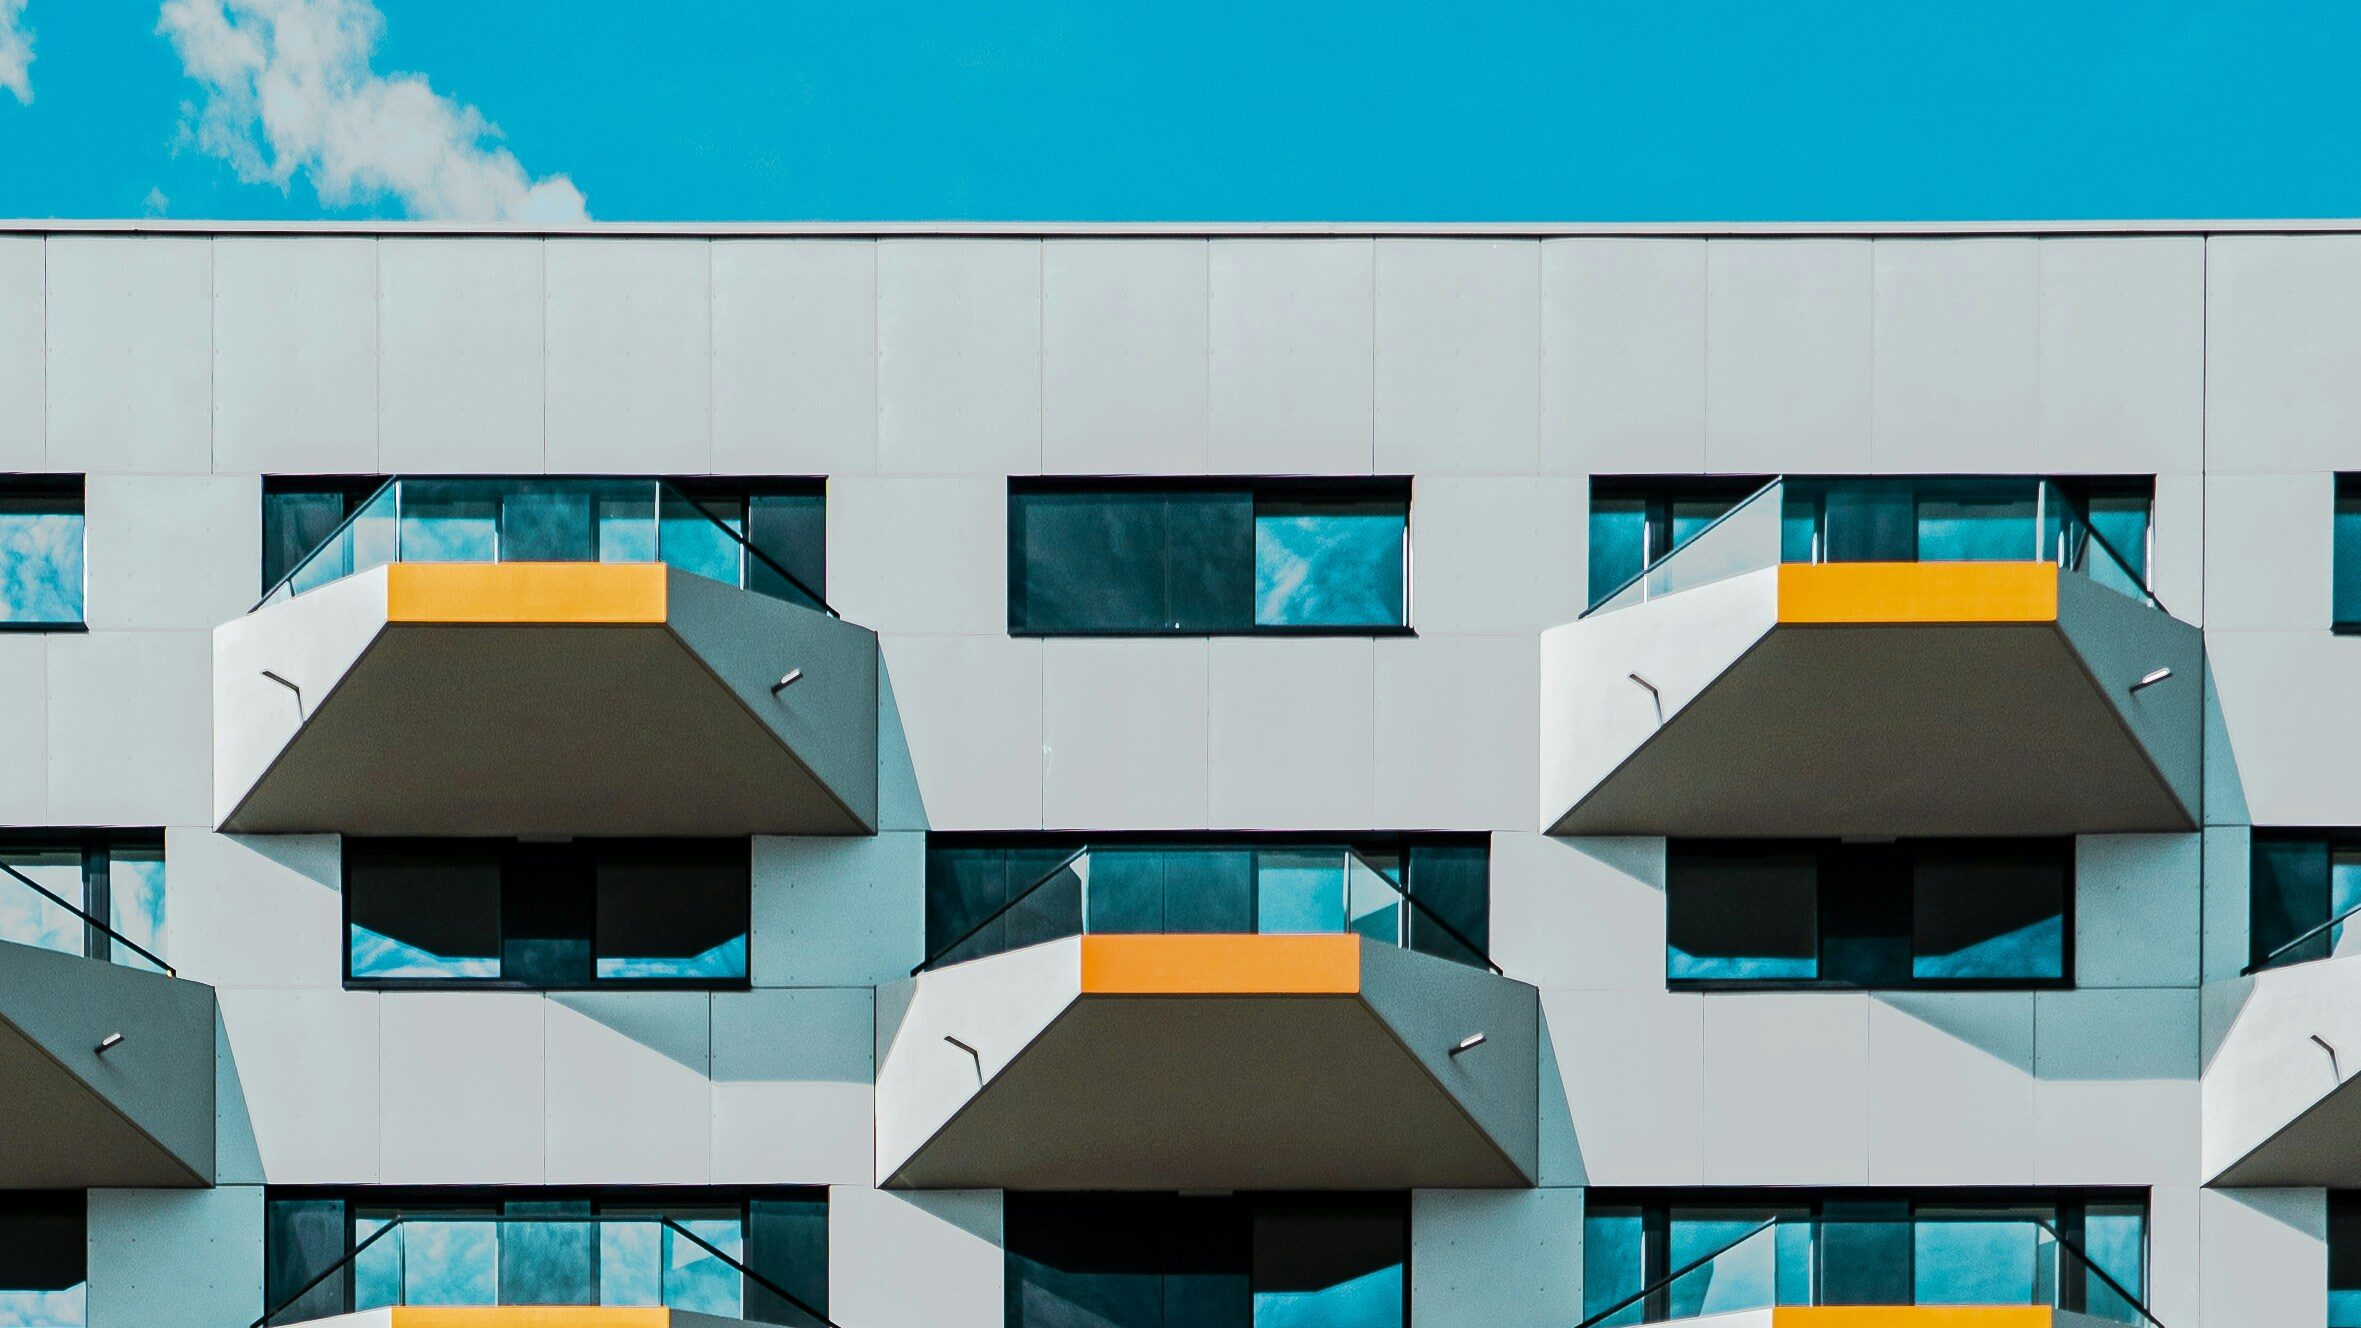 sfr property management abstract gray condo building with yellow accent terraces geometrical on blue sky